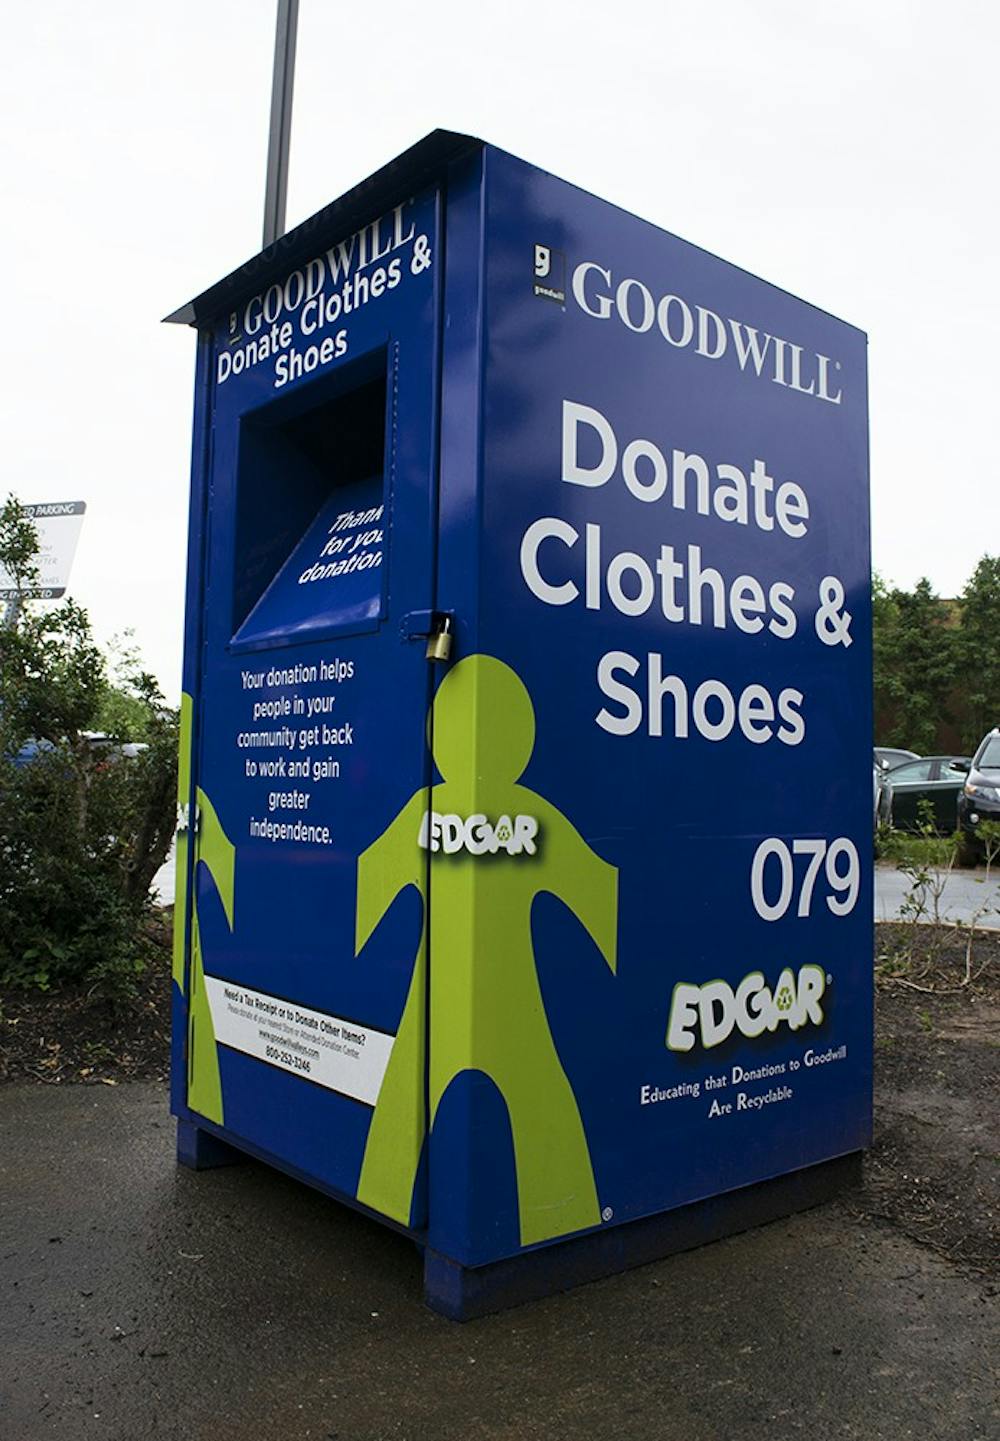 Chuck It For Charity, in&nbsp;partner&nbsp;with local organizations like Goodwill, placed several donation boxes around Grounds for students during move-out time.&nbsp;&nbsp;